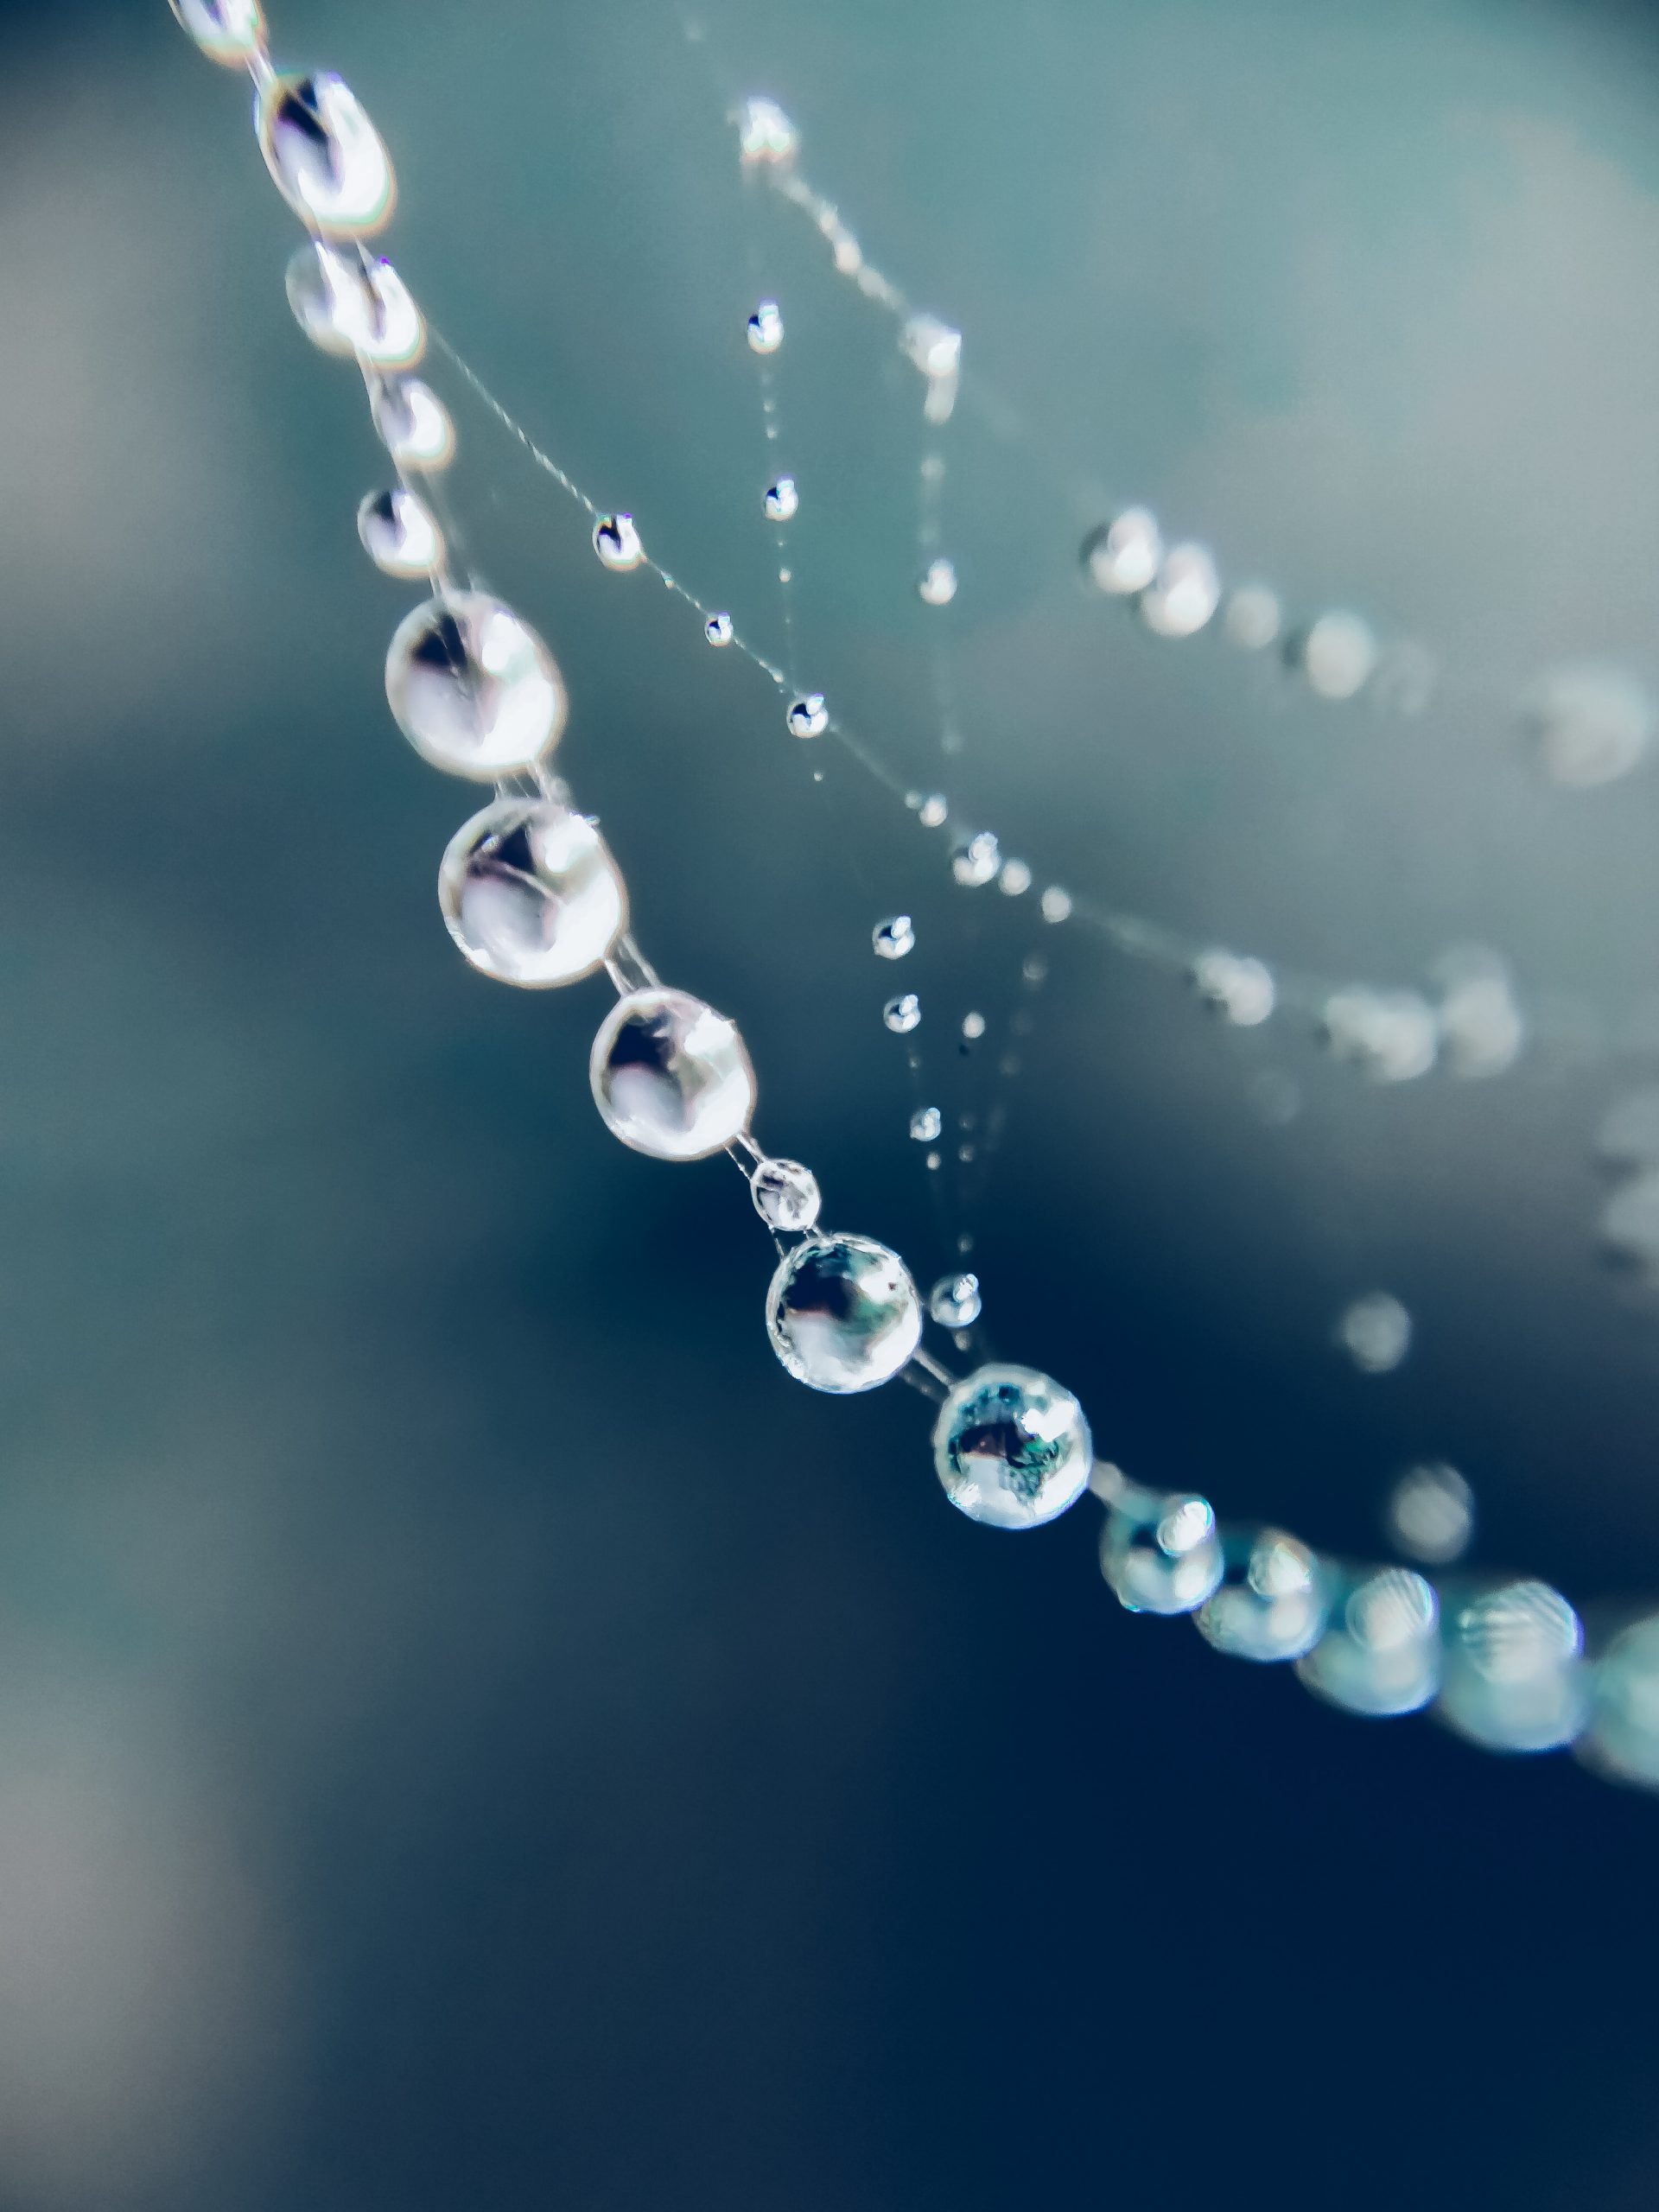 Water droplets on spider web